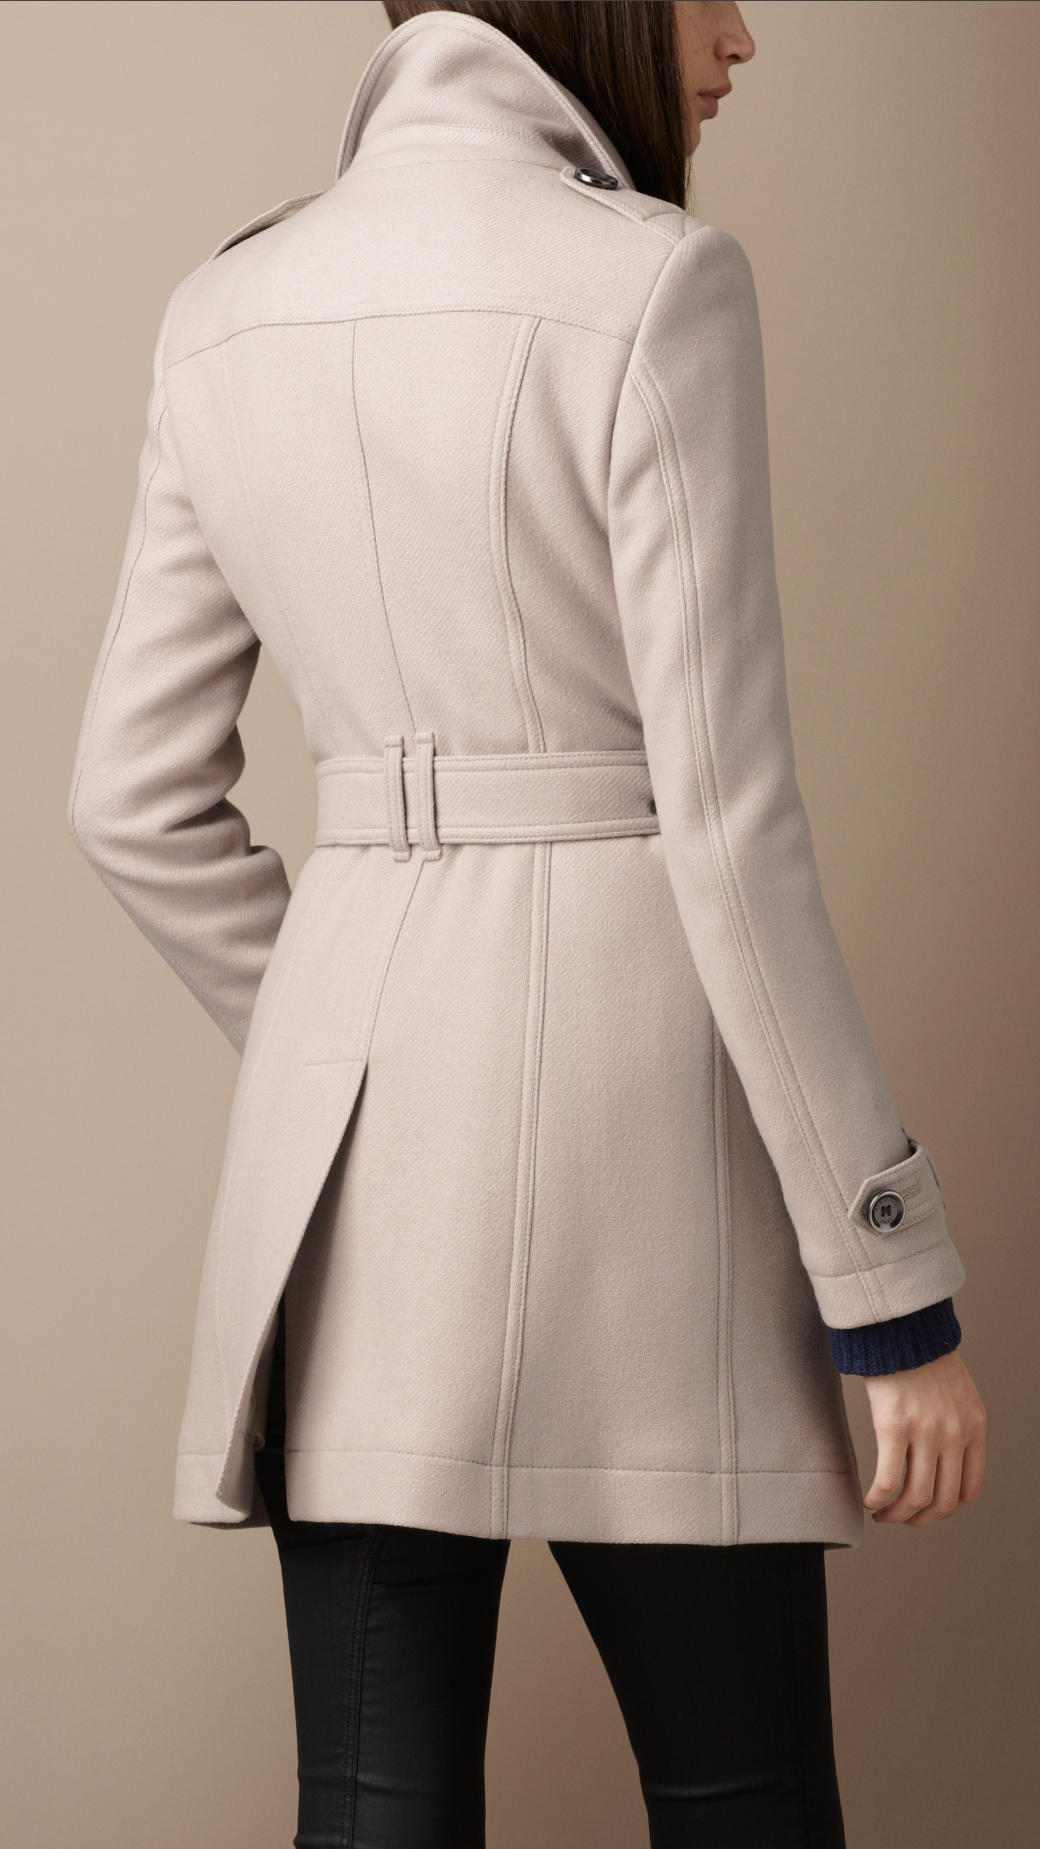 Lyst - Burberry Brit Funnel Neck Wool Coat in Natural